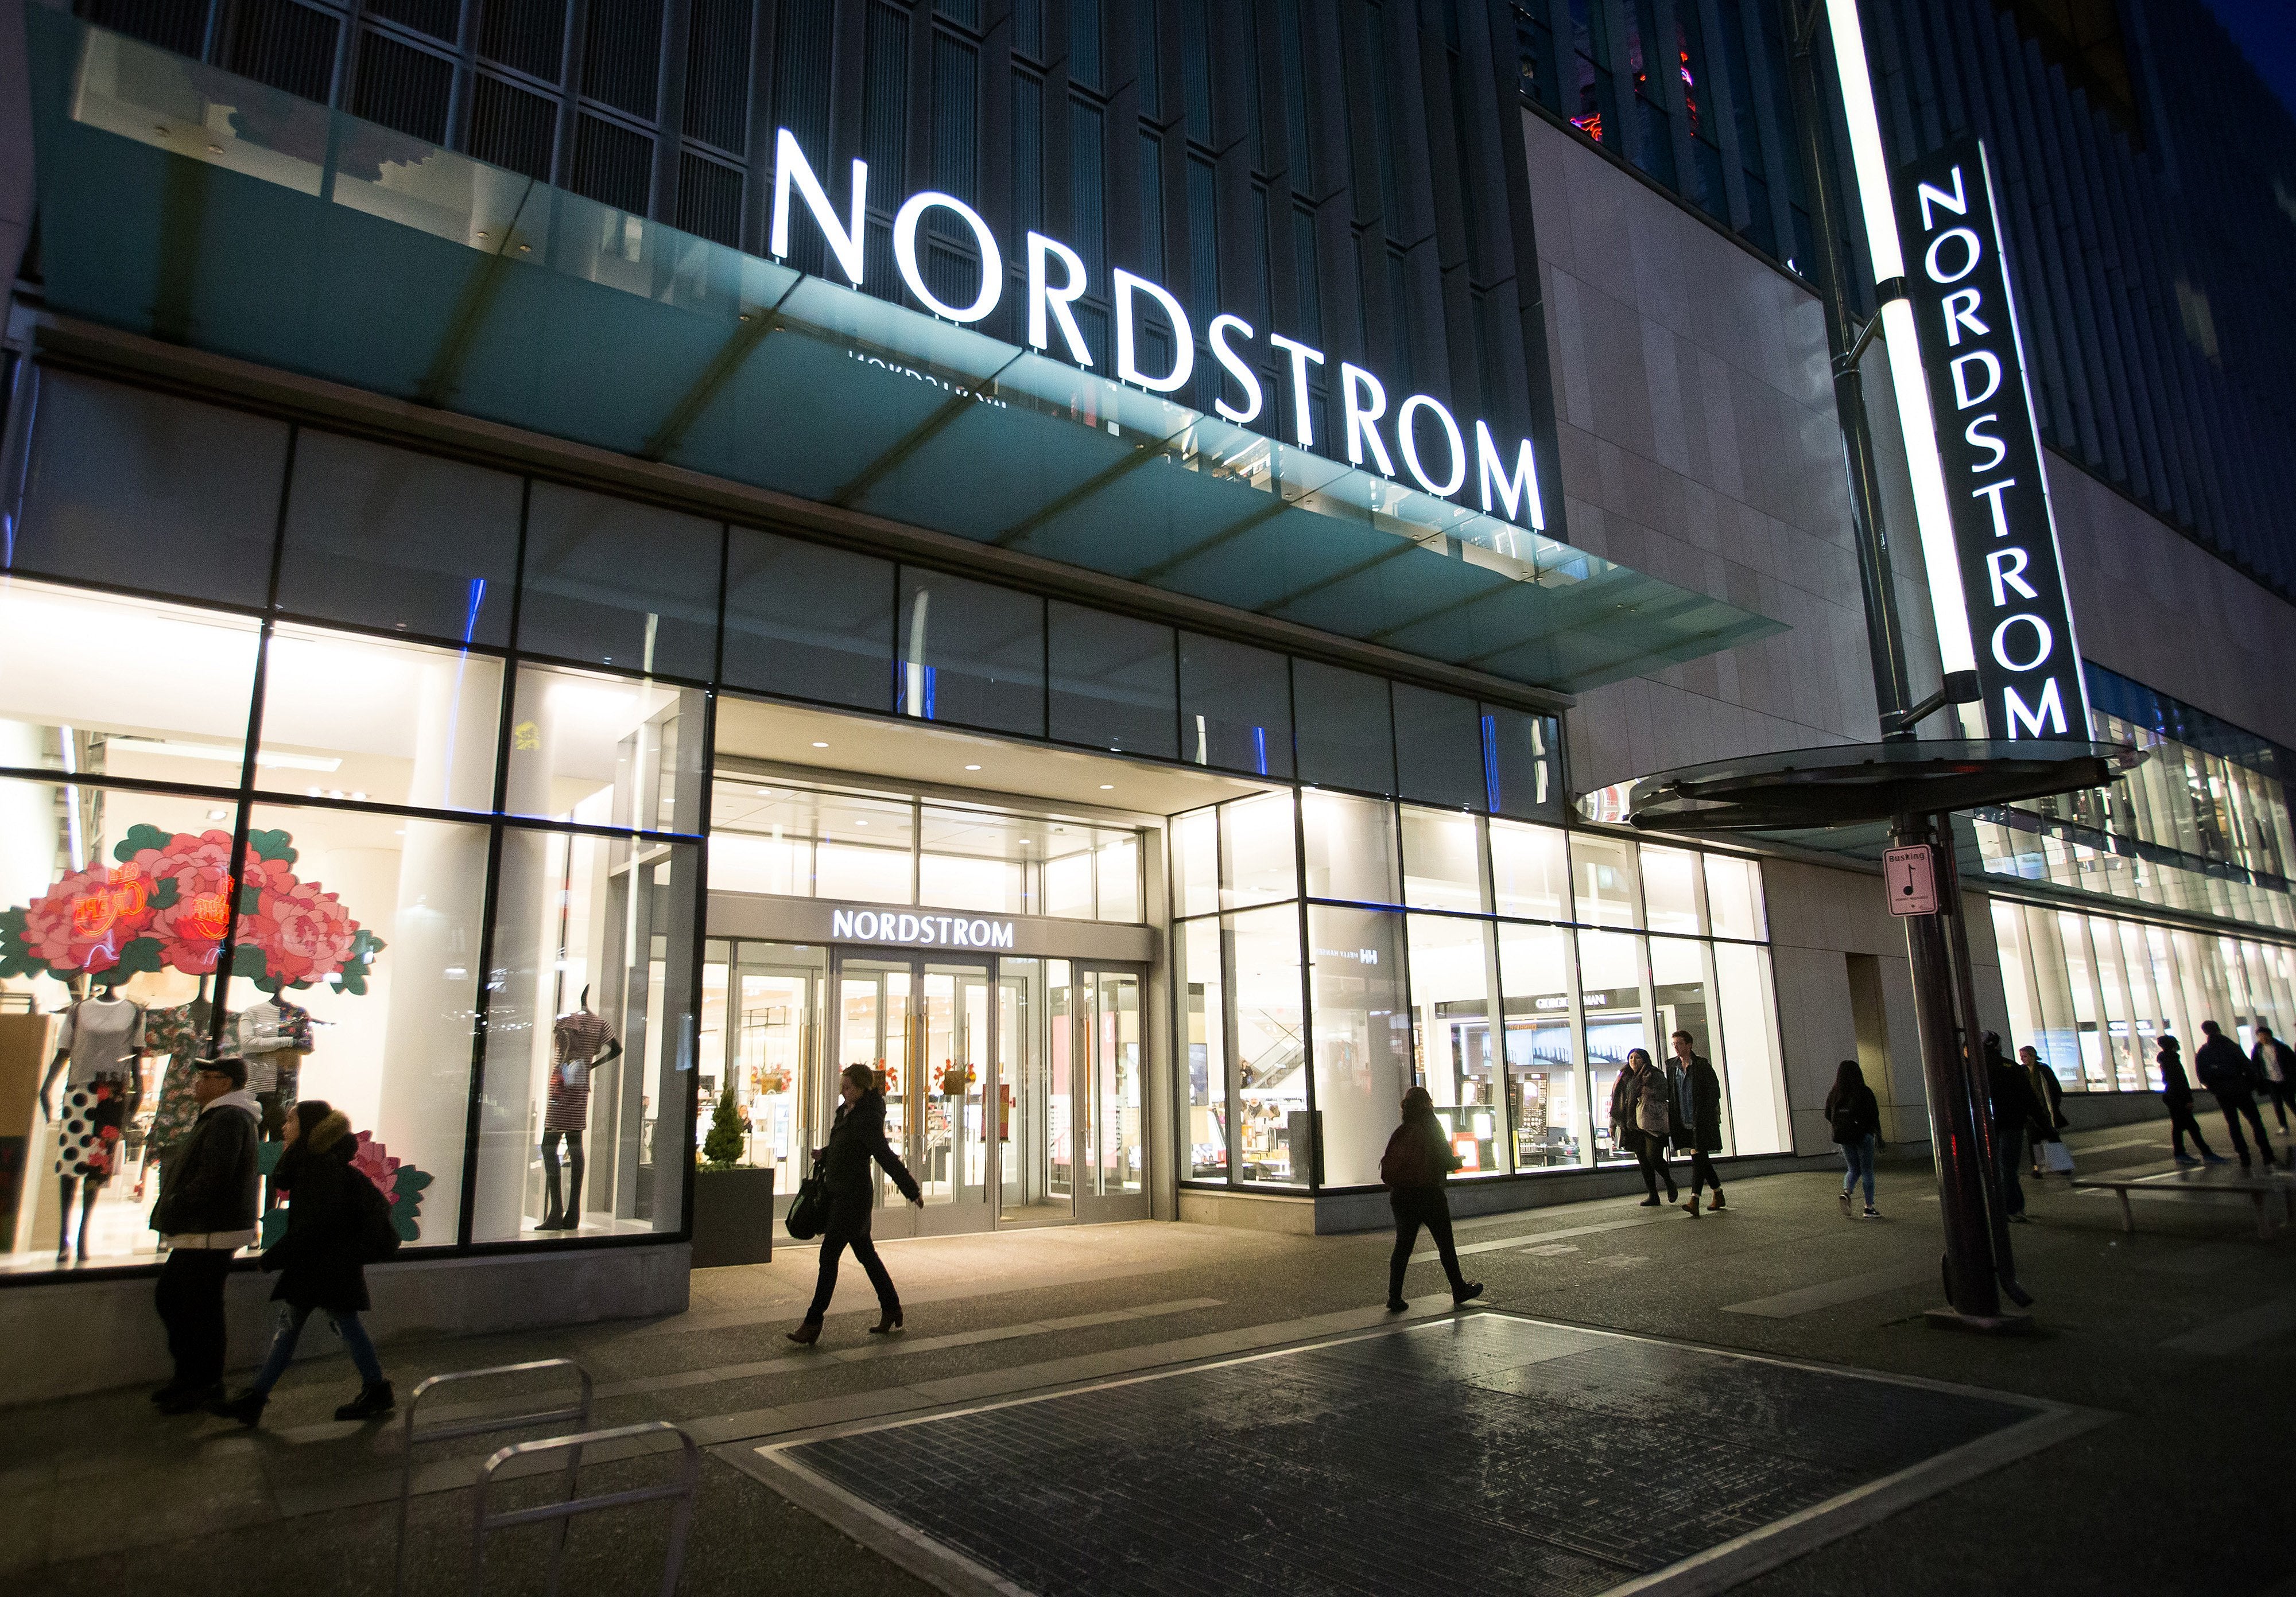 Nordstrom Is Having A Major Fall Sale, Here's What You Should Snag ASAP
